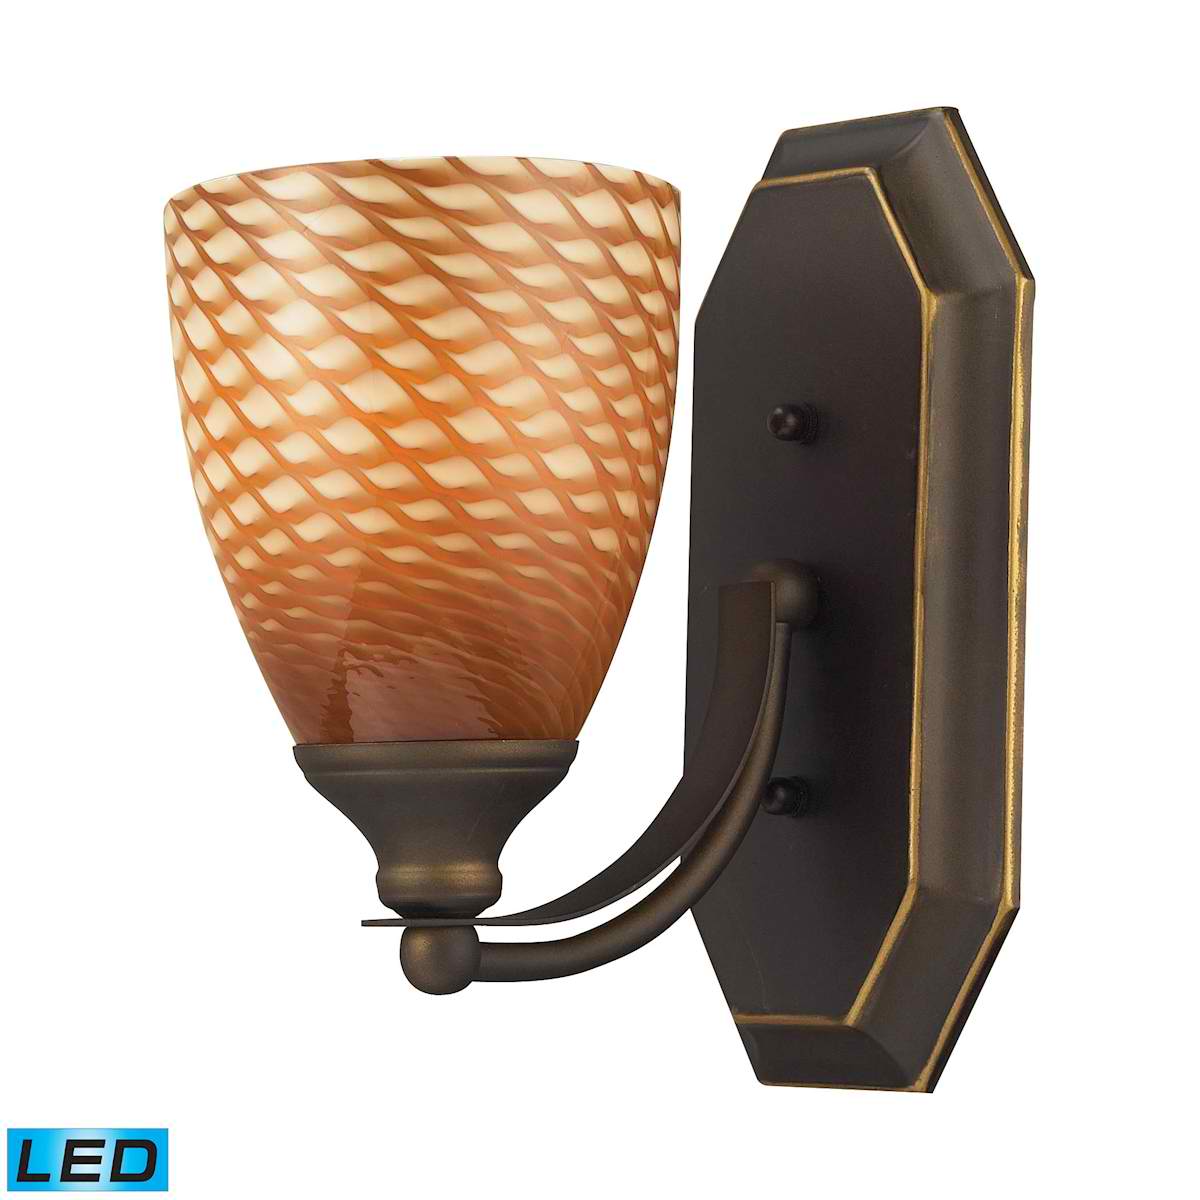 1 Light Vanity in Aged Bronze and Coco Glass - LED Offering Up To 800 Lumens (60 Watt Equivalent)